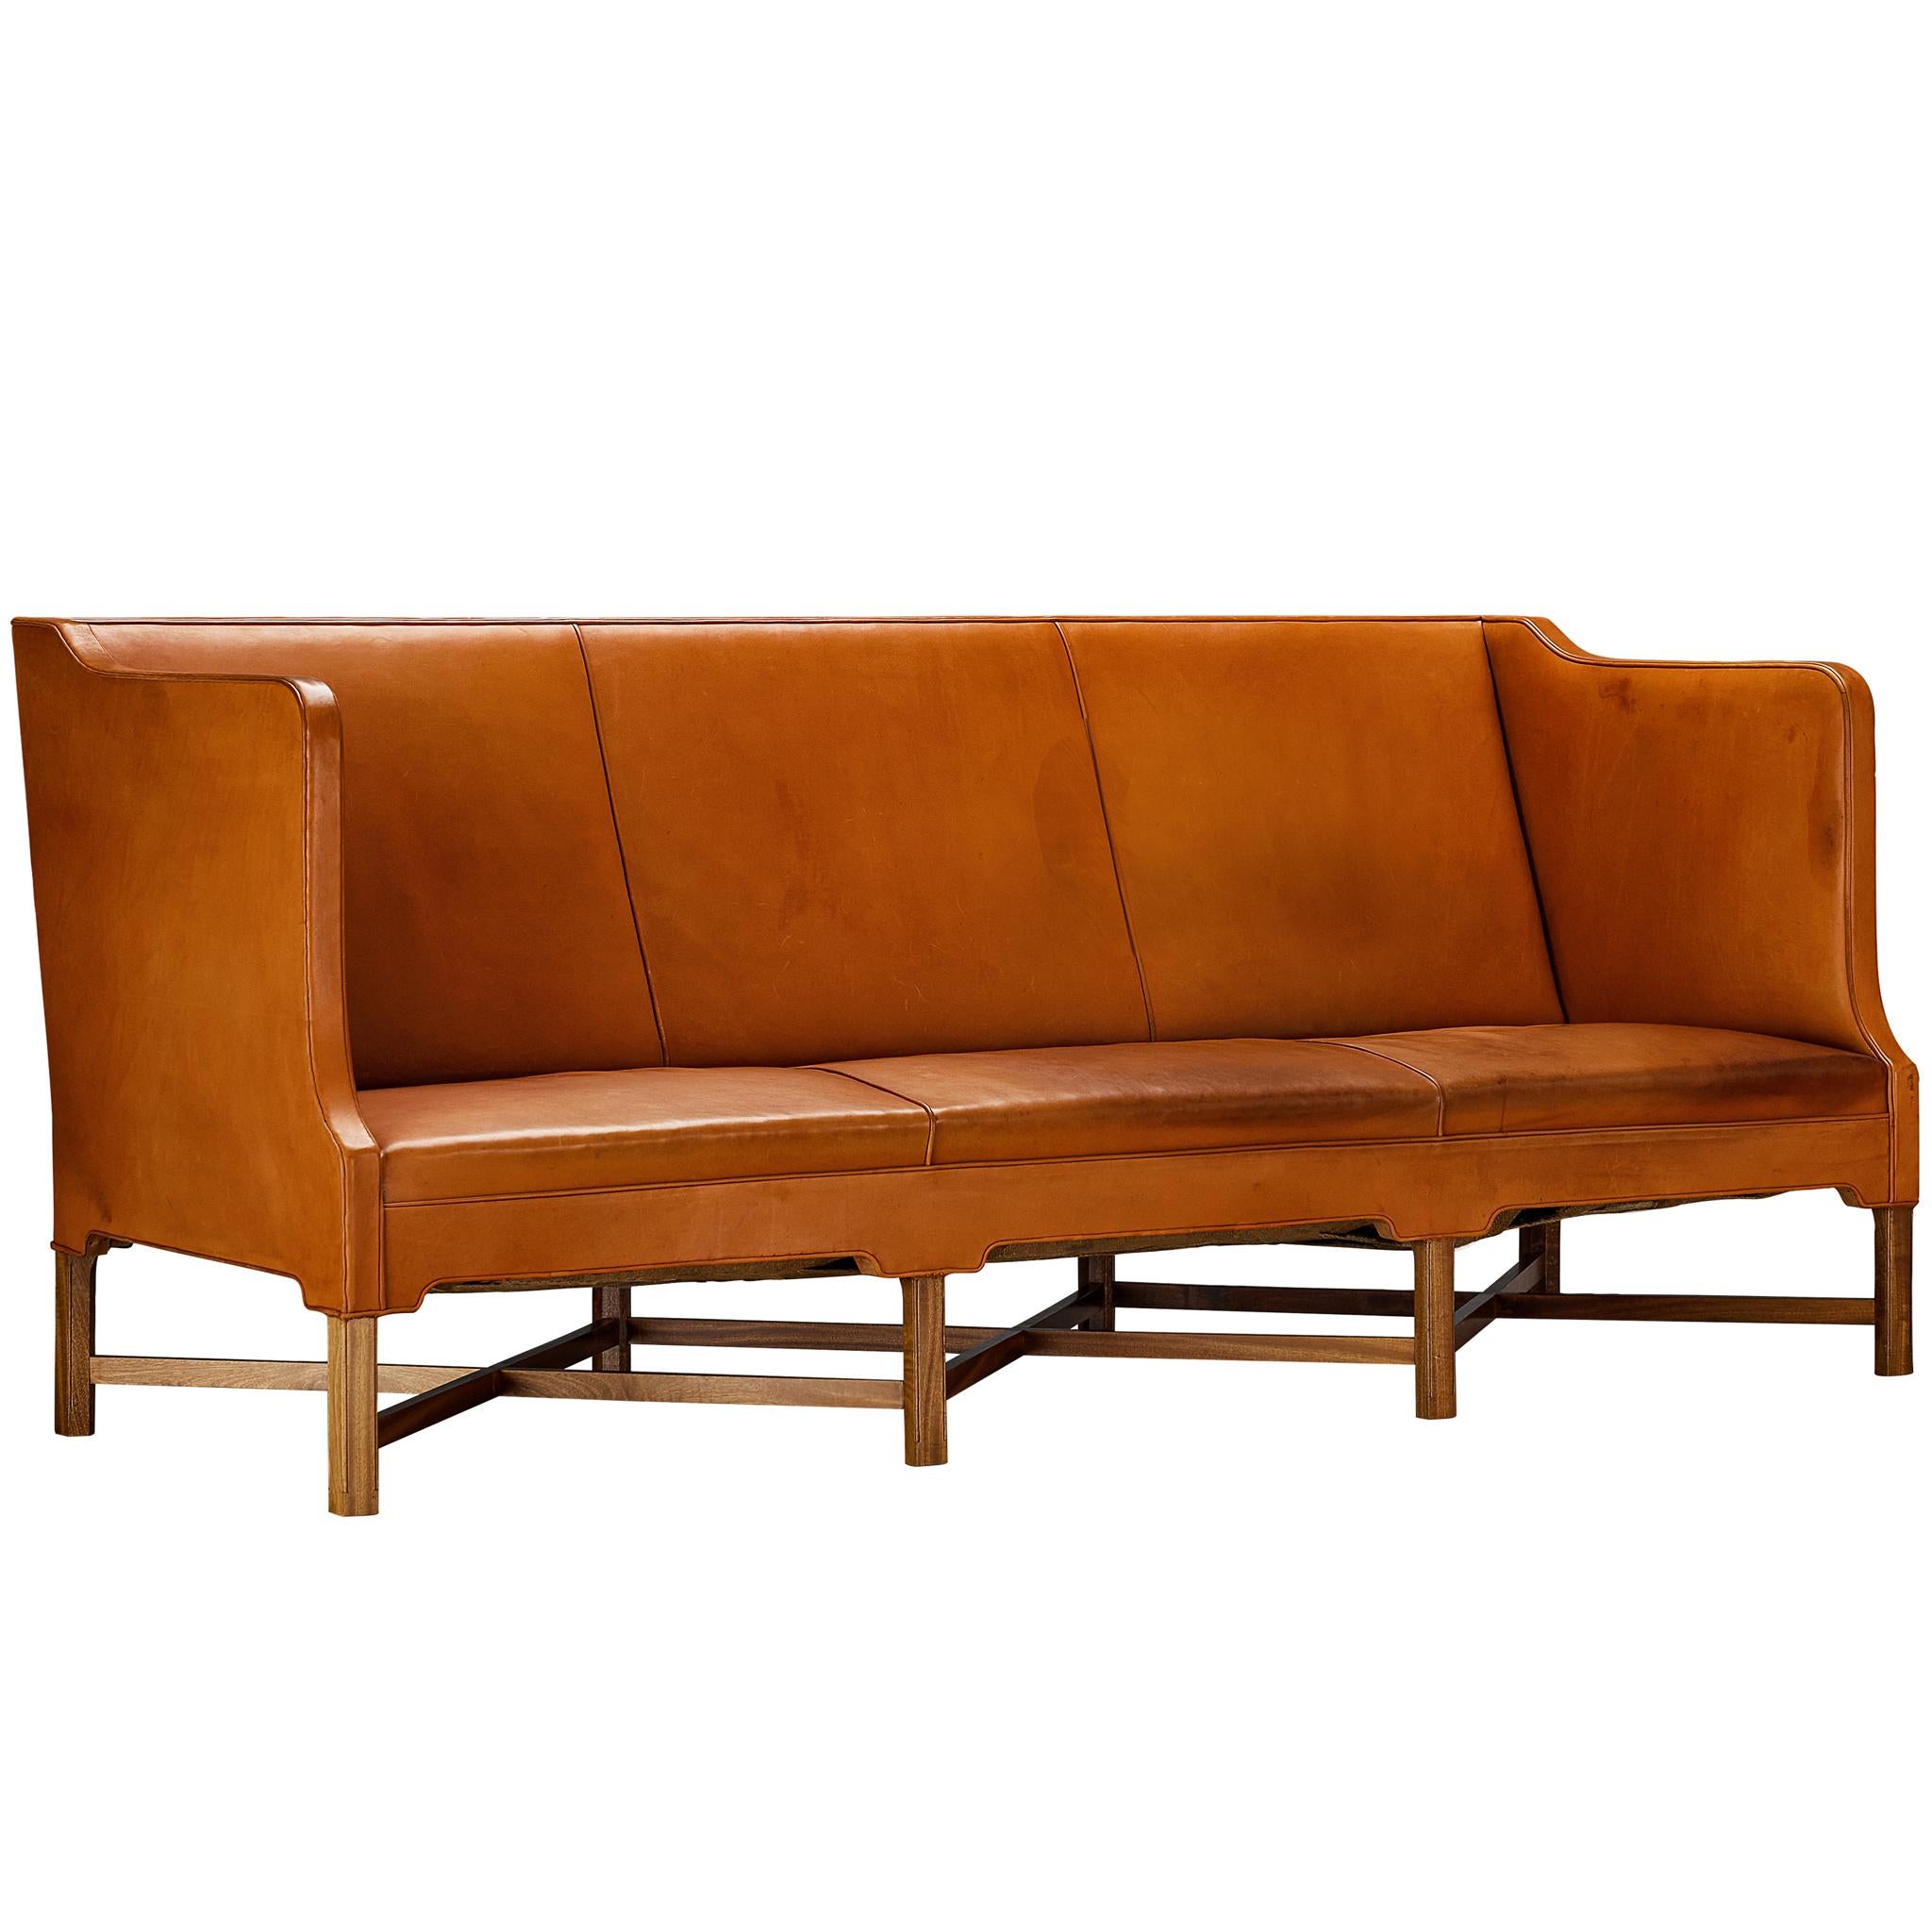 Kaare Klint for Rud. Rasmussen Sofa Model 4118 in Leather and Mahogany  For Sale